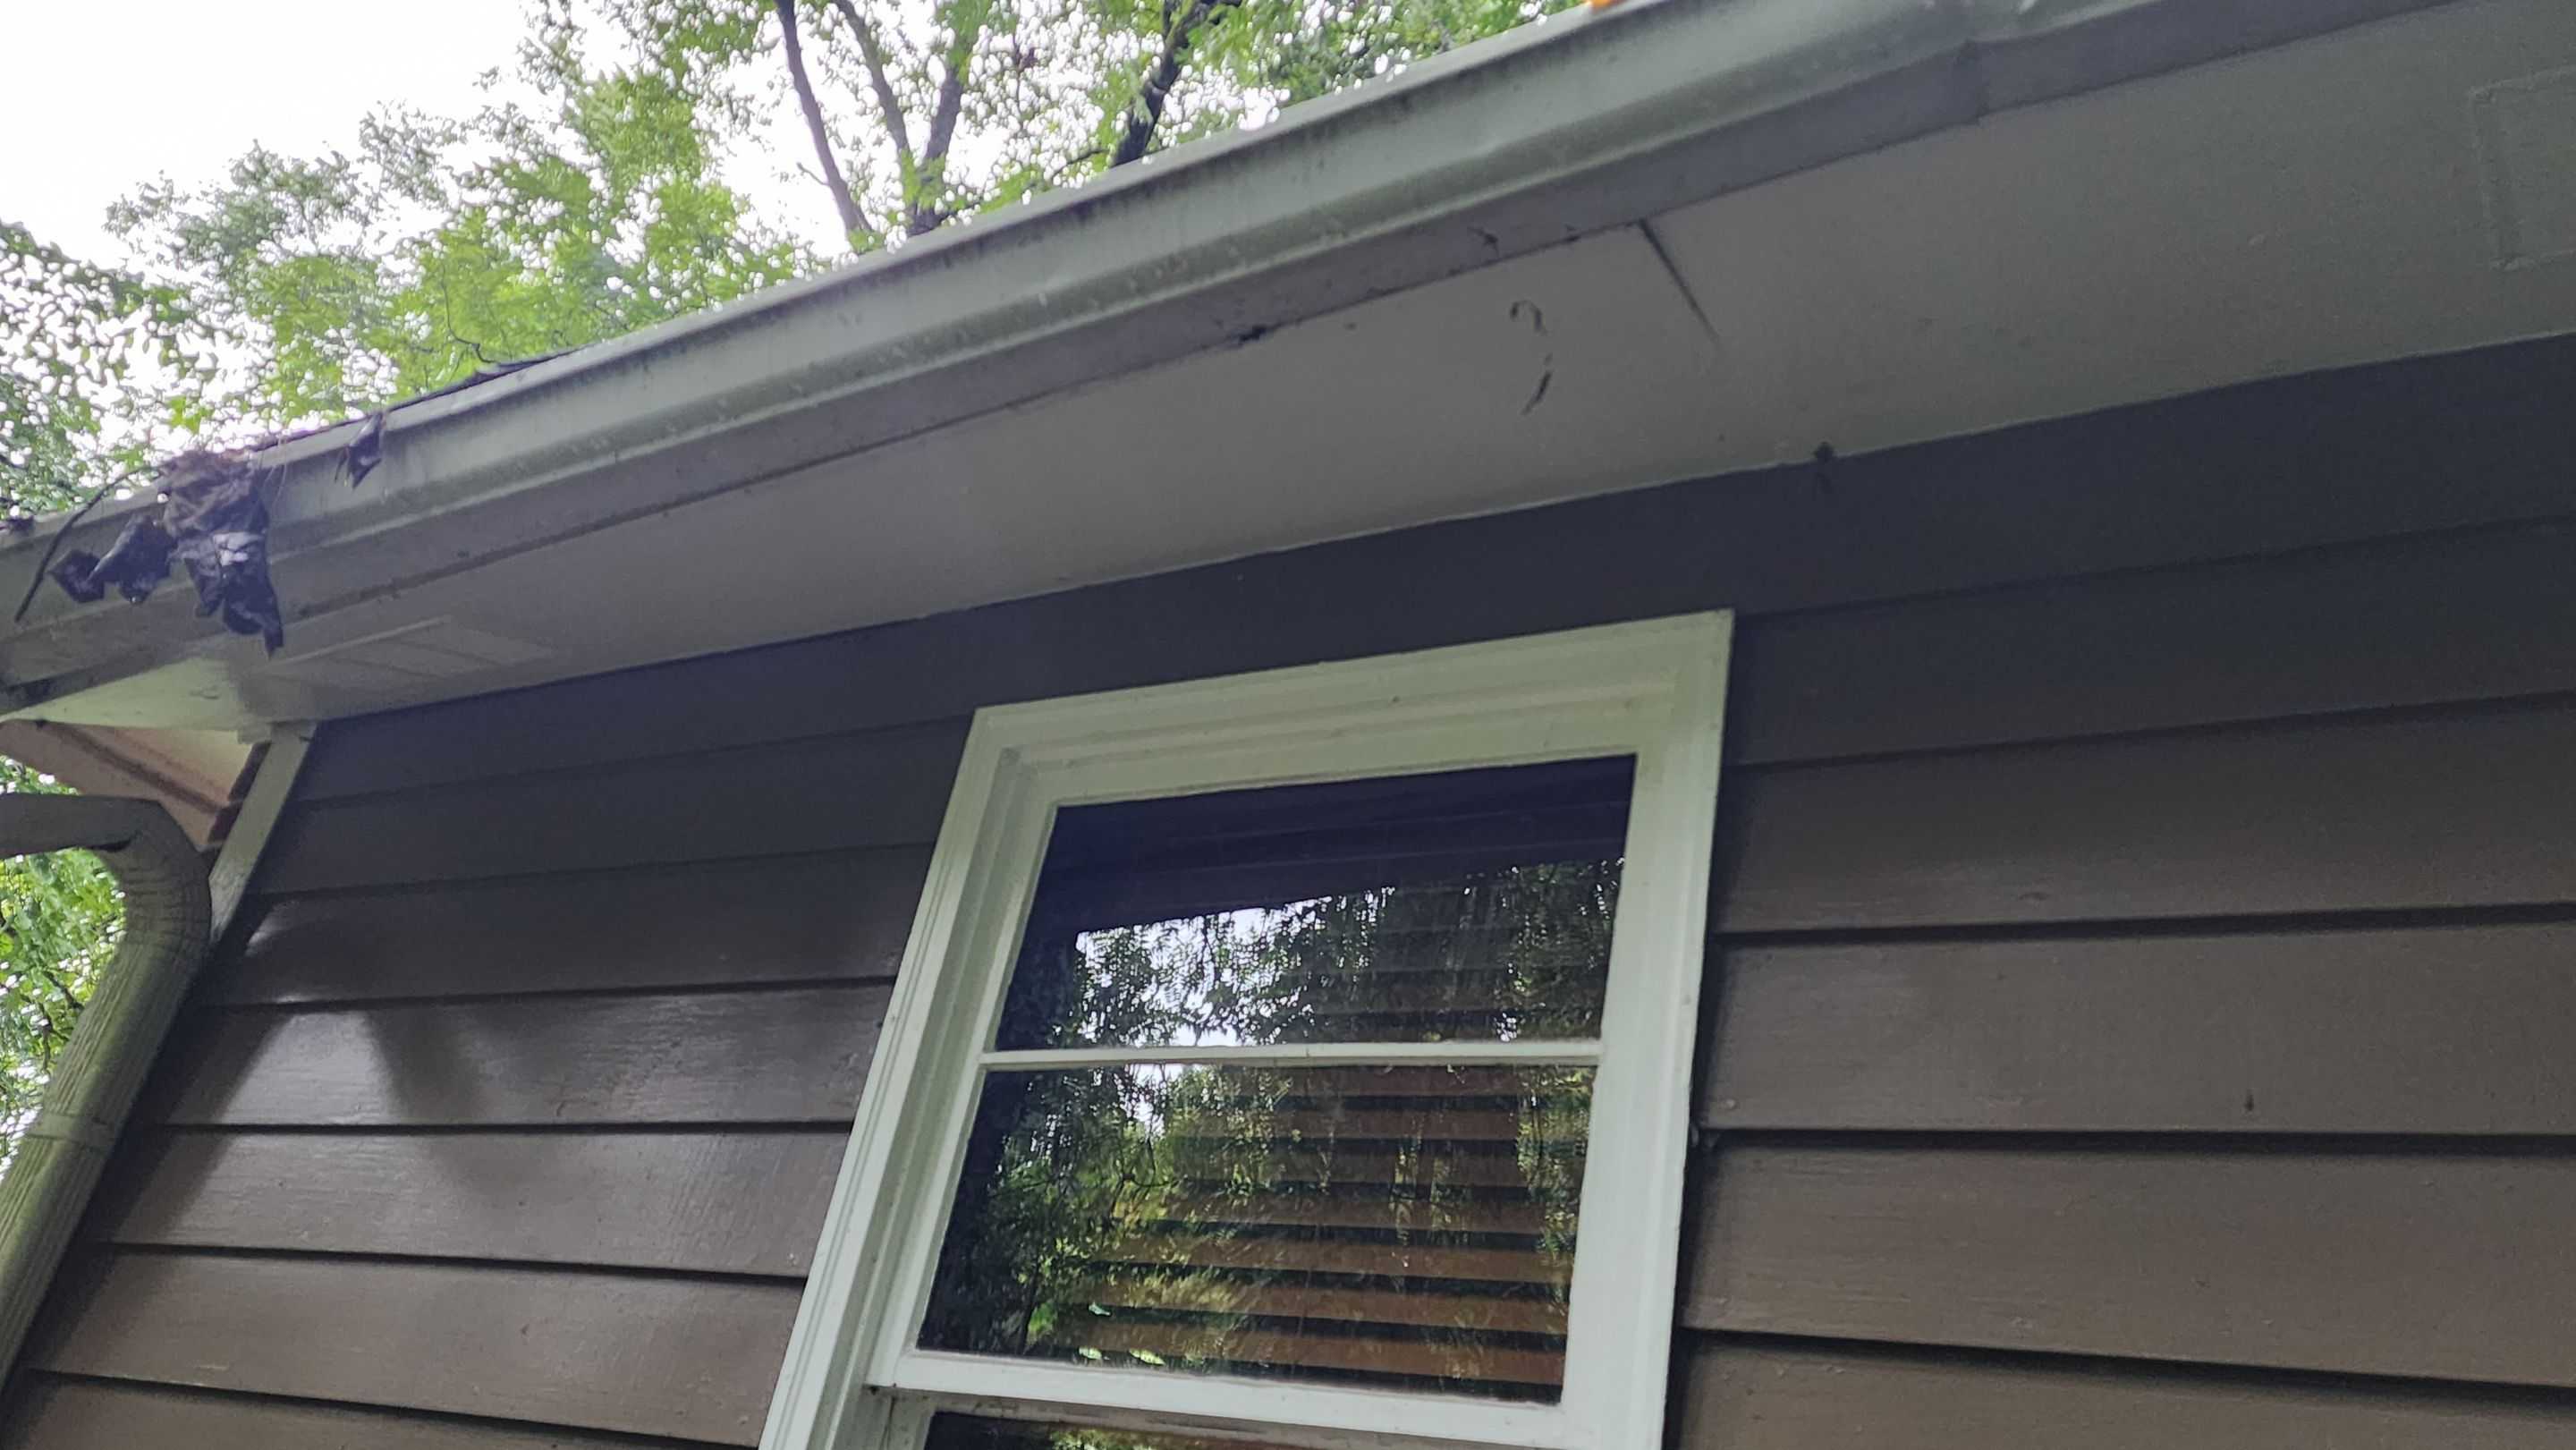 Damage to roof, gutters, and downspouts